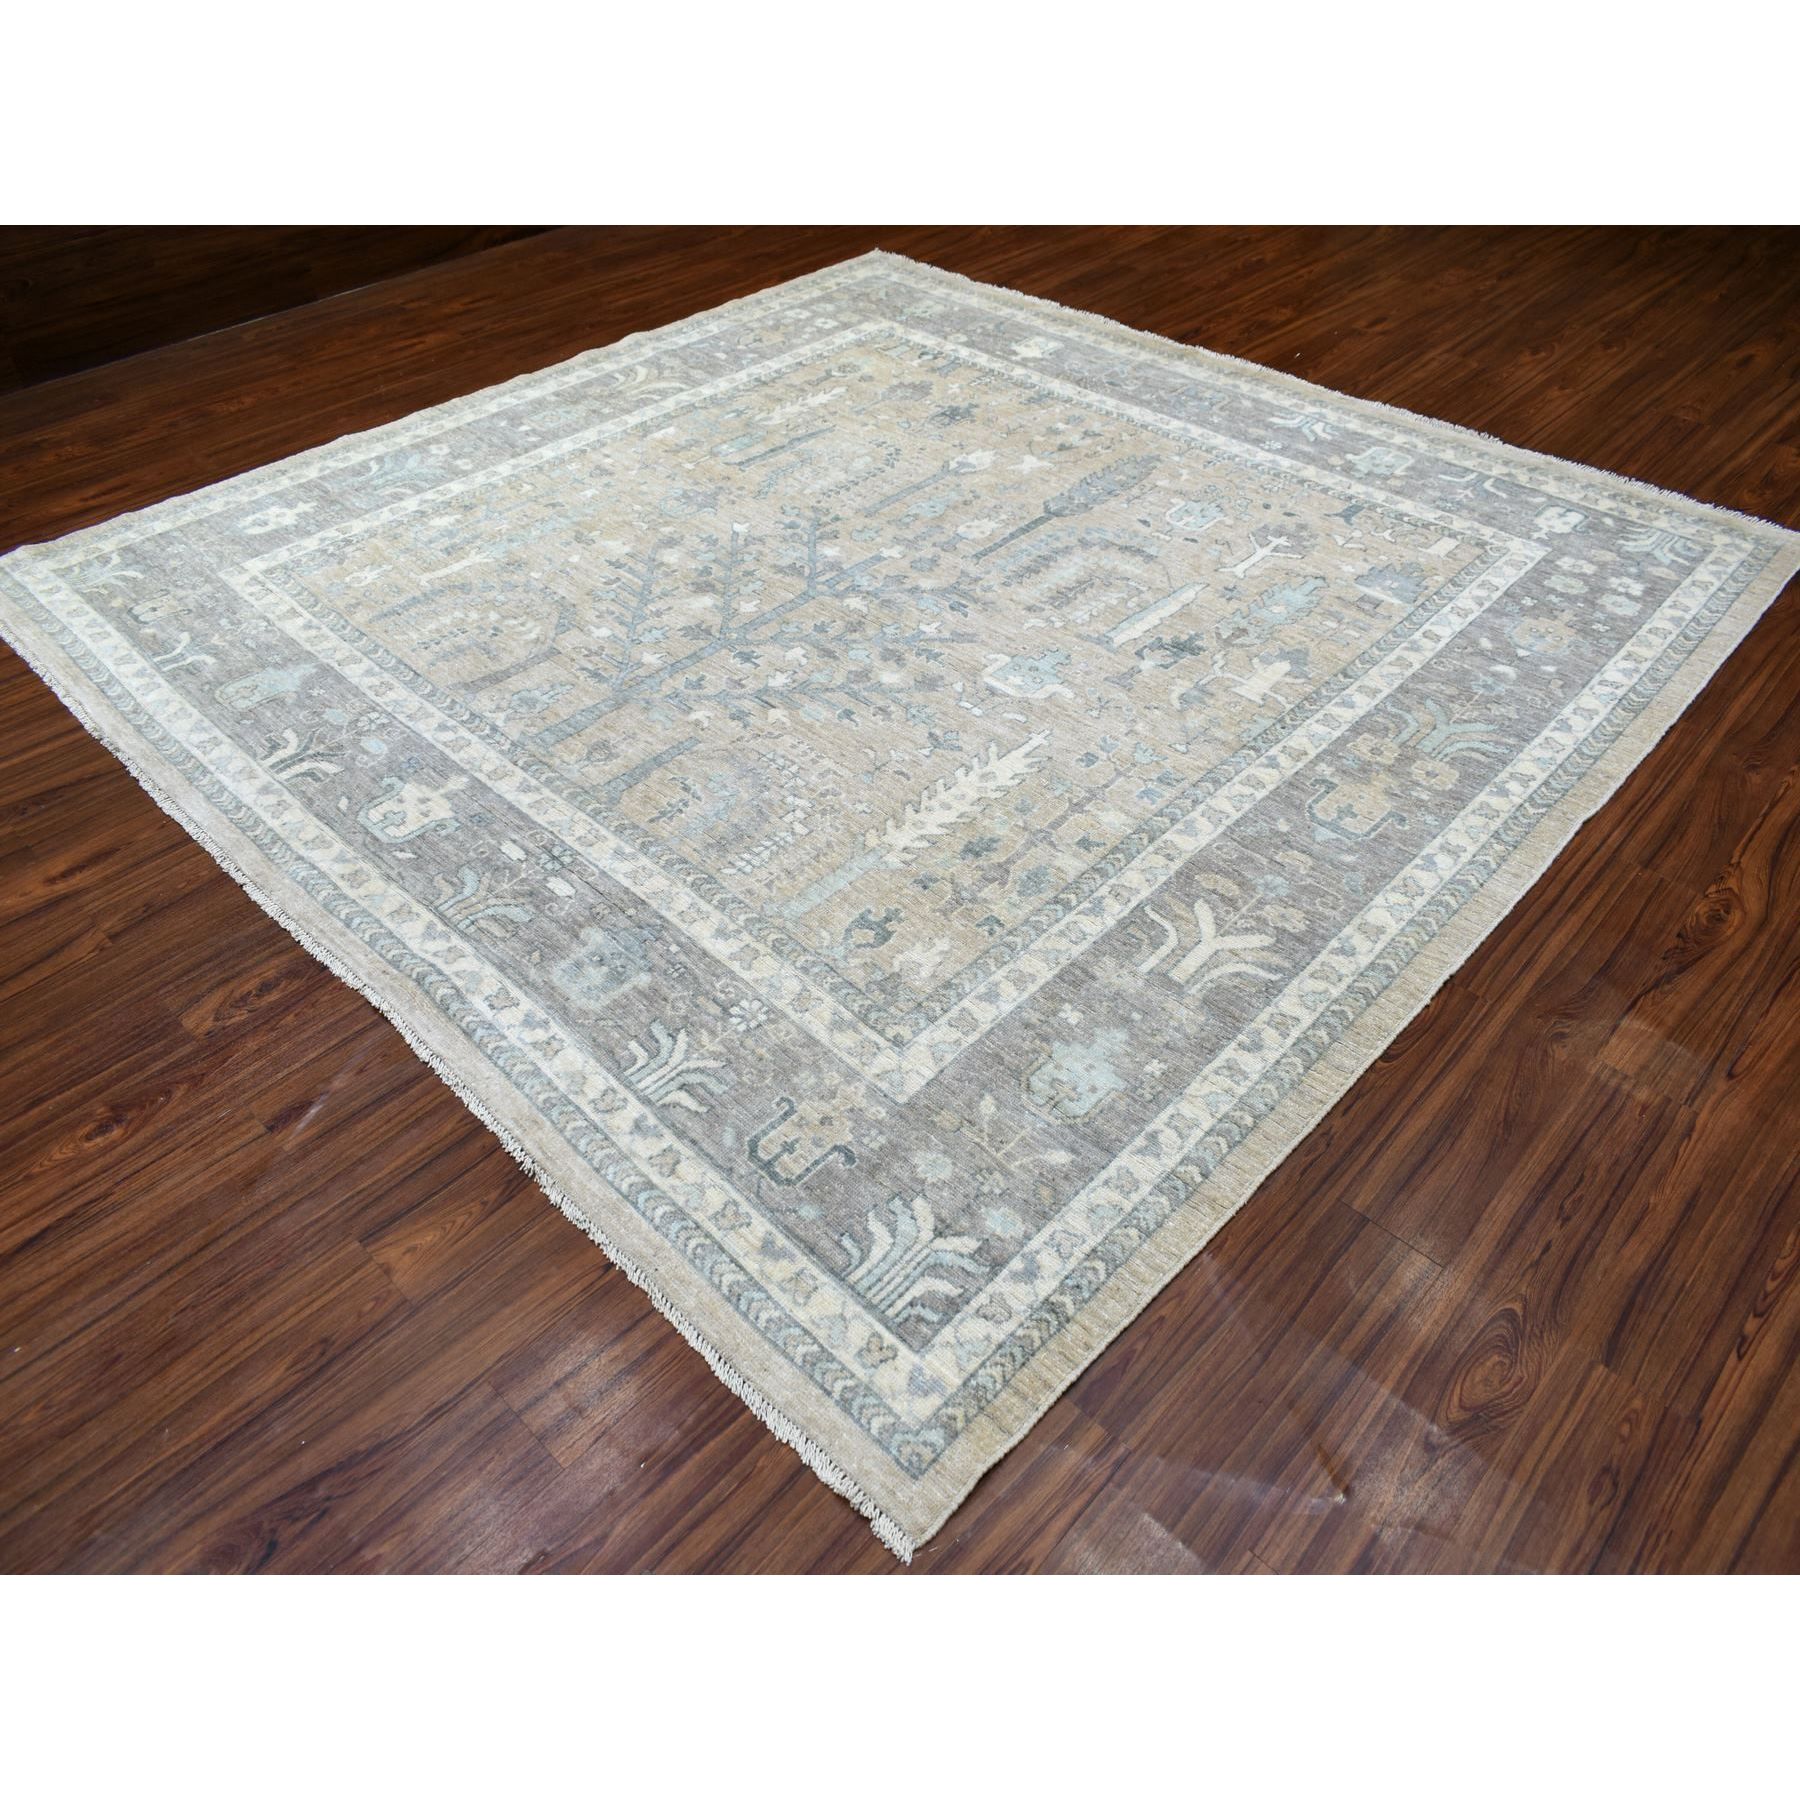 10'x10' Gray Afghan Angora Ushak with Willow and Cypress Tree Design Pure Wool Hand Woven Oriental Square Rug 